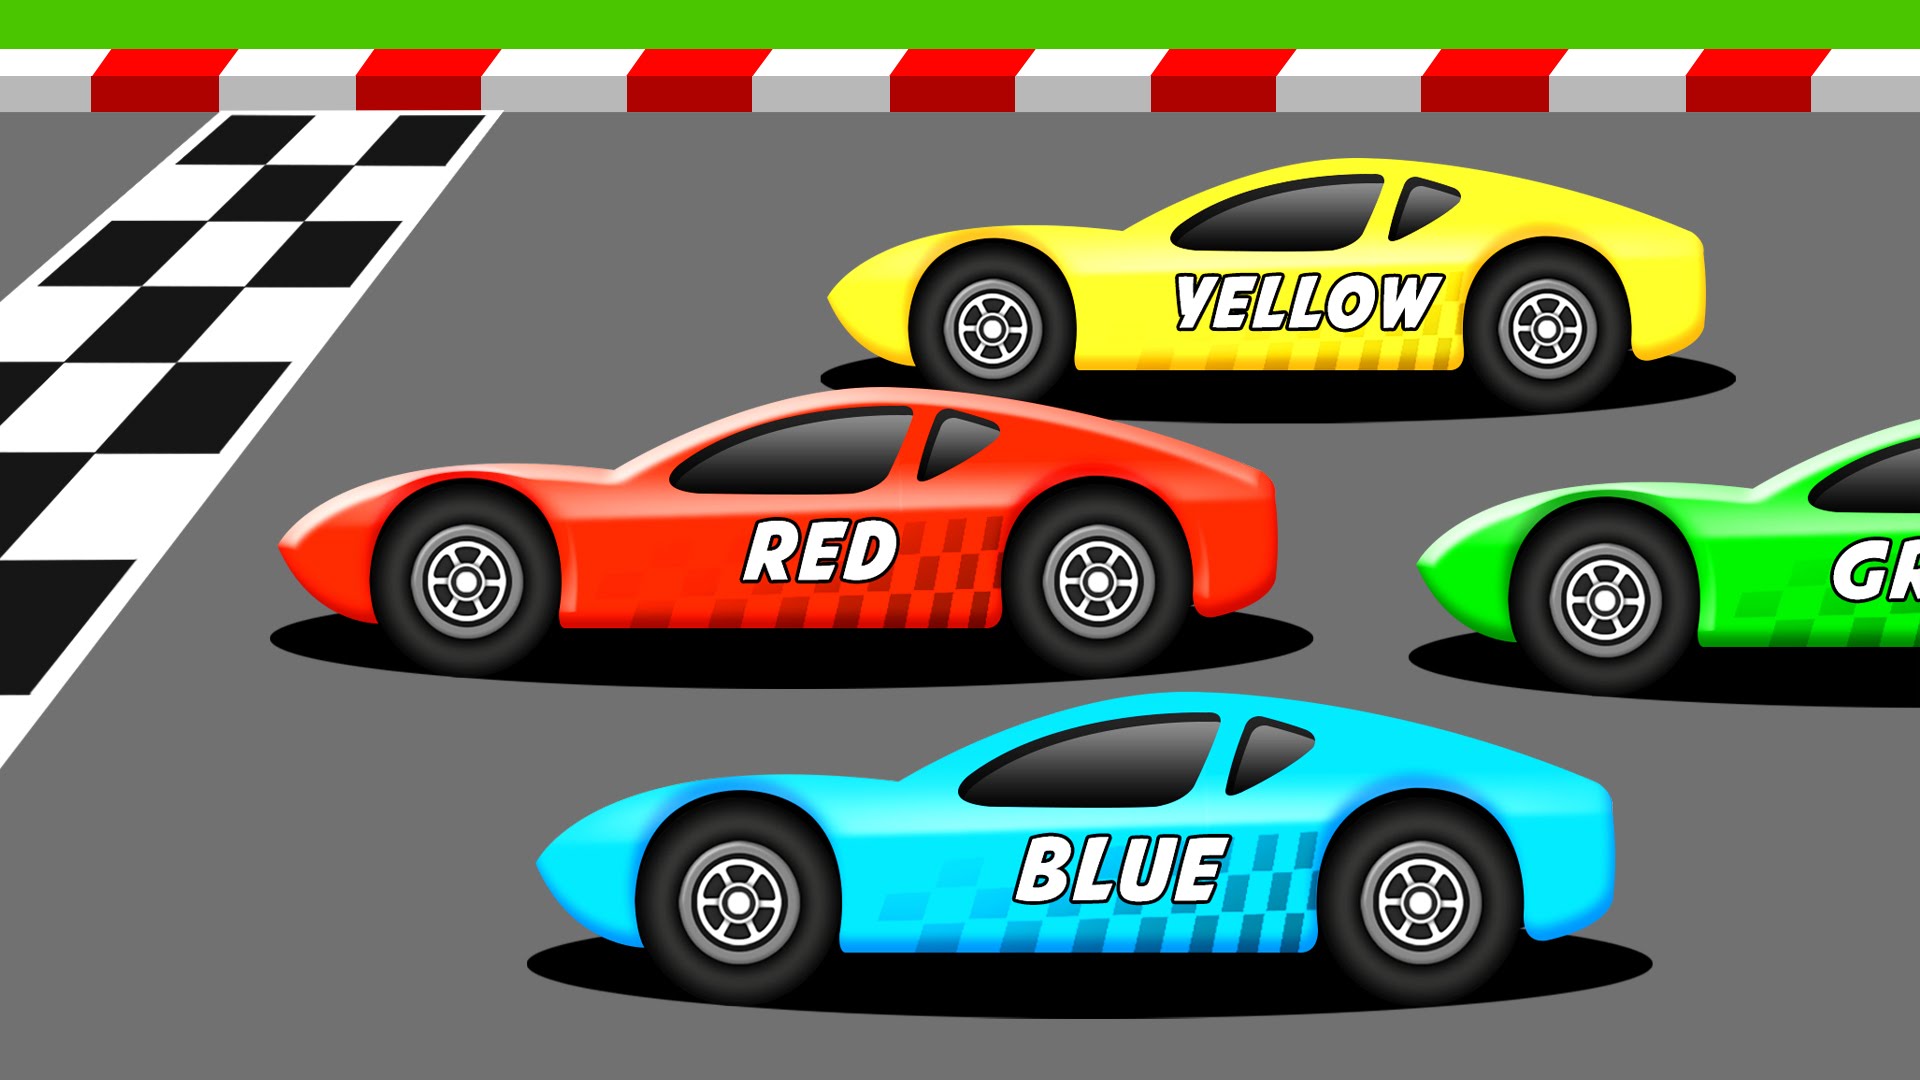 Learn the Colors with Racing Cars - YouTube